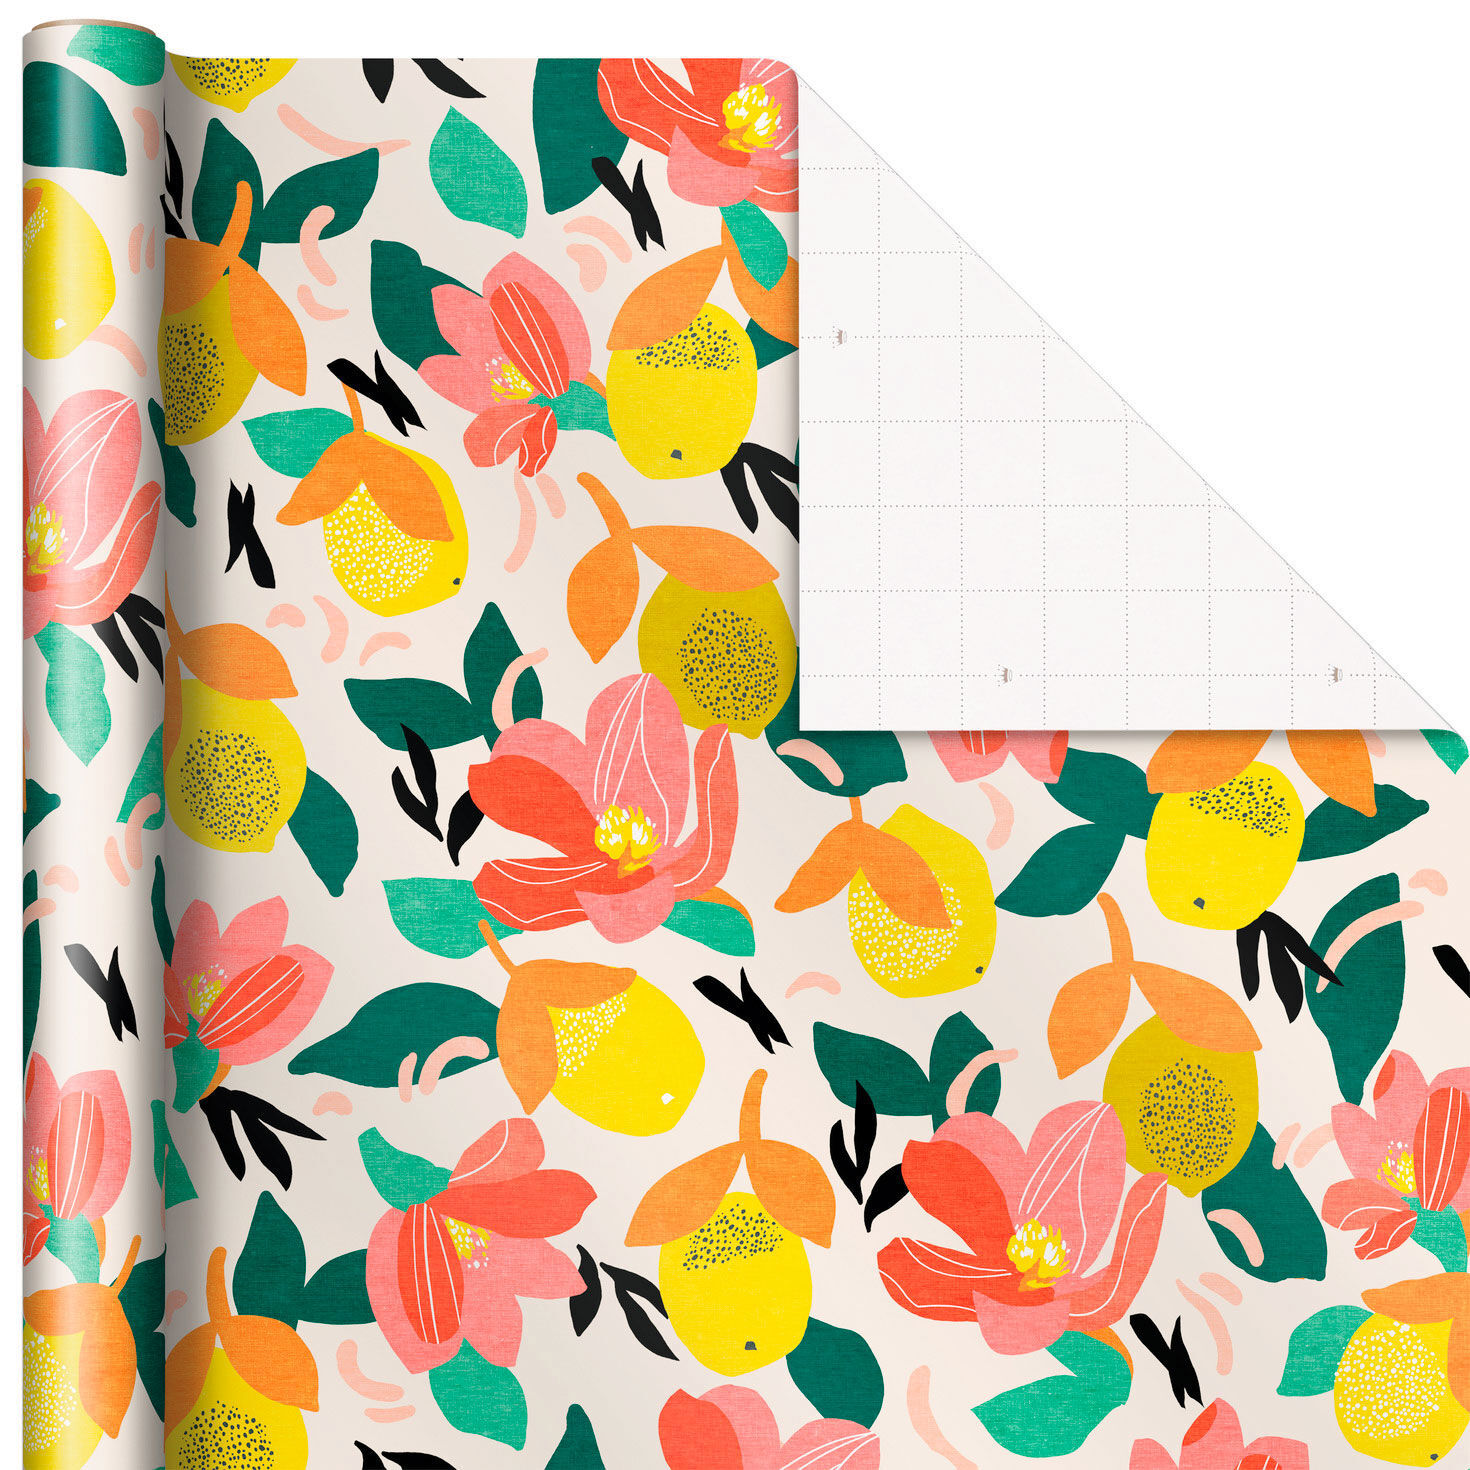 Floral Wrapping Paper  Gold Vintage Floral Wrapping Paper Roll